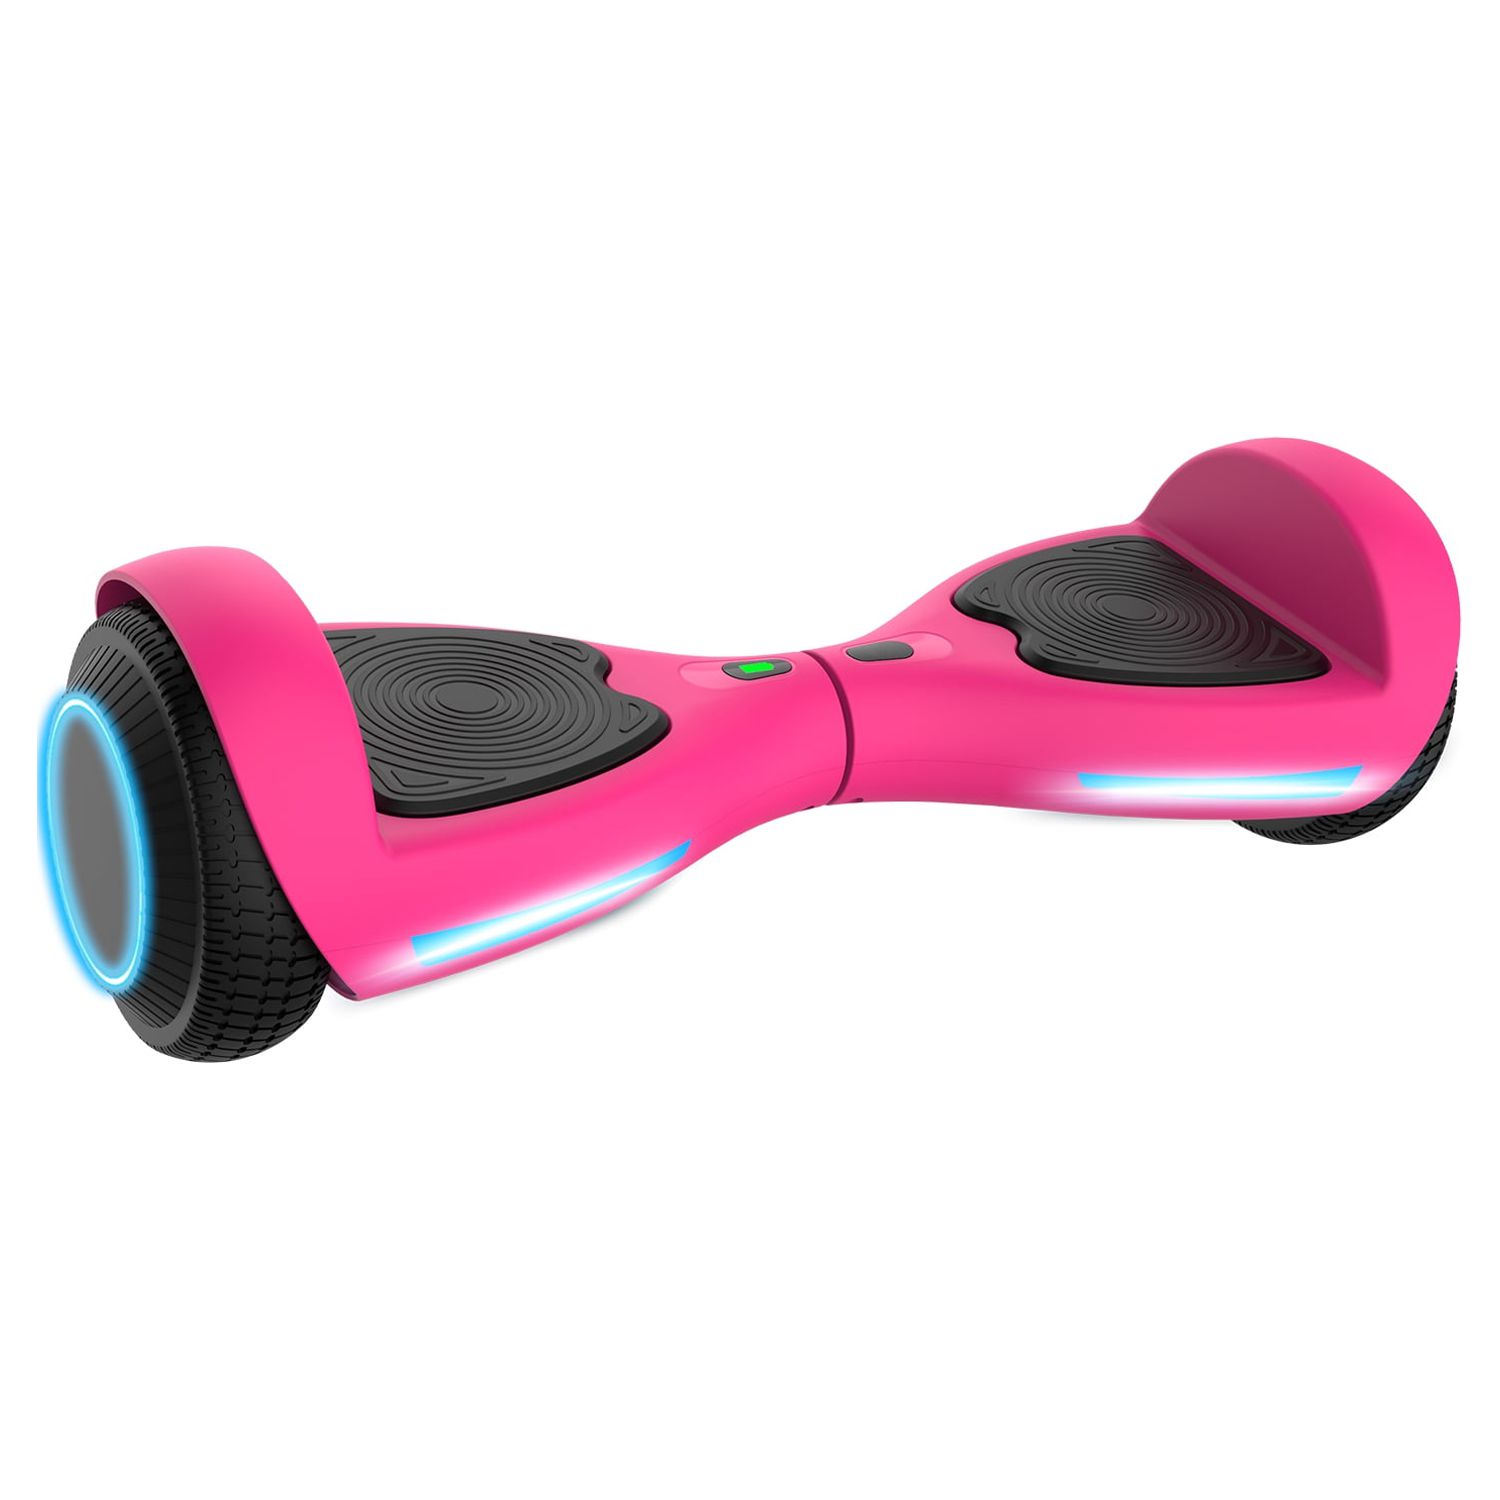 GOTRAX FX3 Hoverboard for Kids Adults 200W Motor 6.5" LED Wheels 6.2mph Top Speed, Pink - image 1 of 12